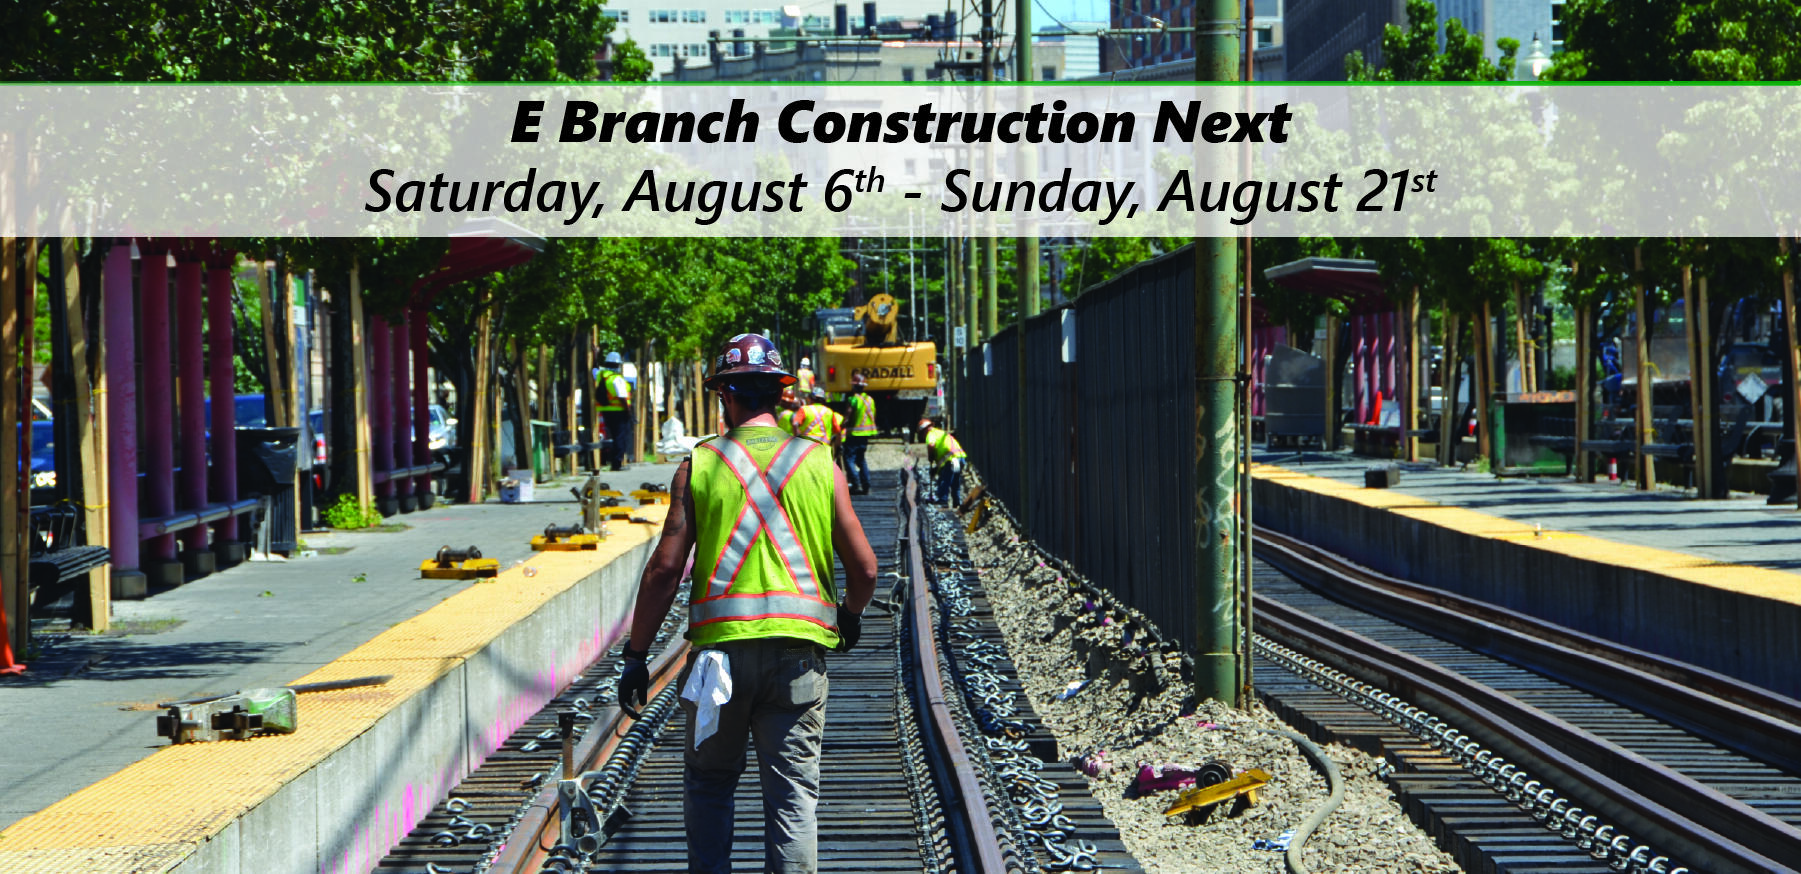 Construction on the E Branch of the Green Line will begin on Saturday, August 6.